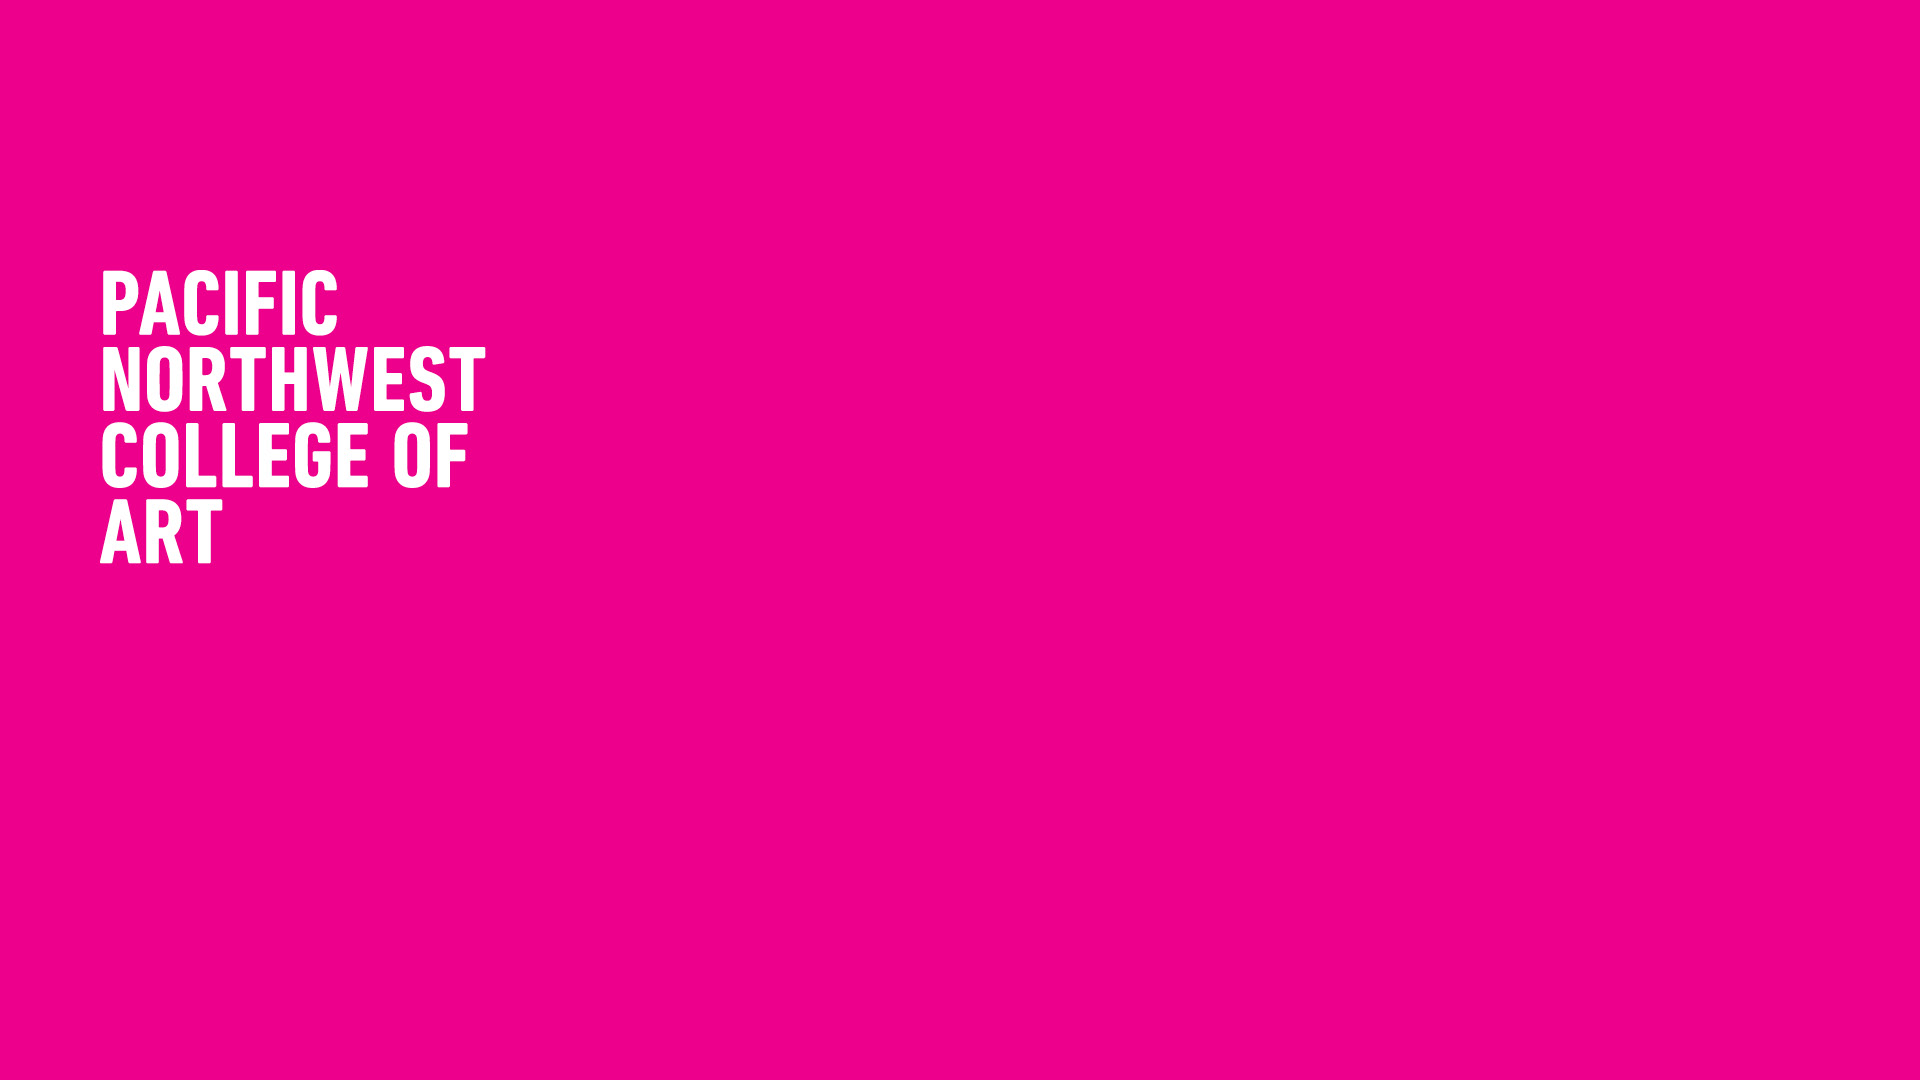 PNCA - spelled out logo with magenta background